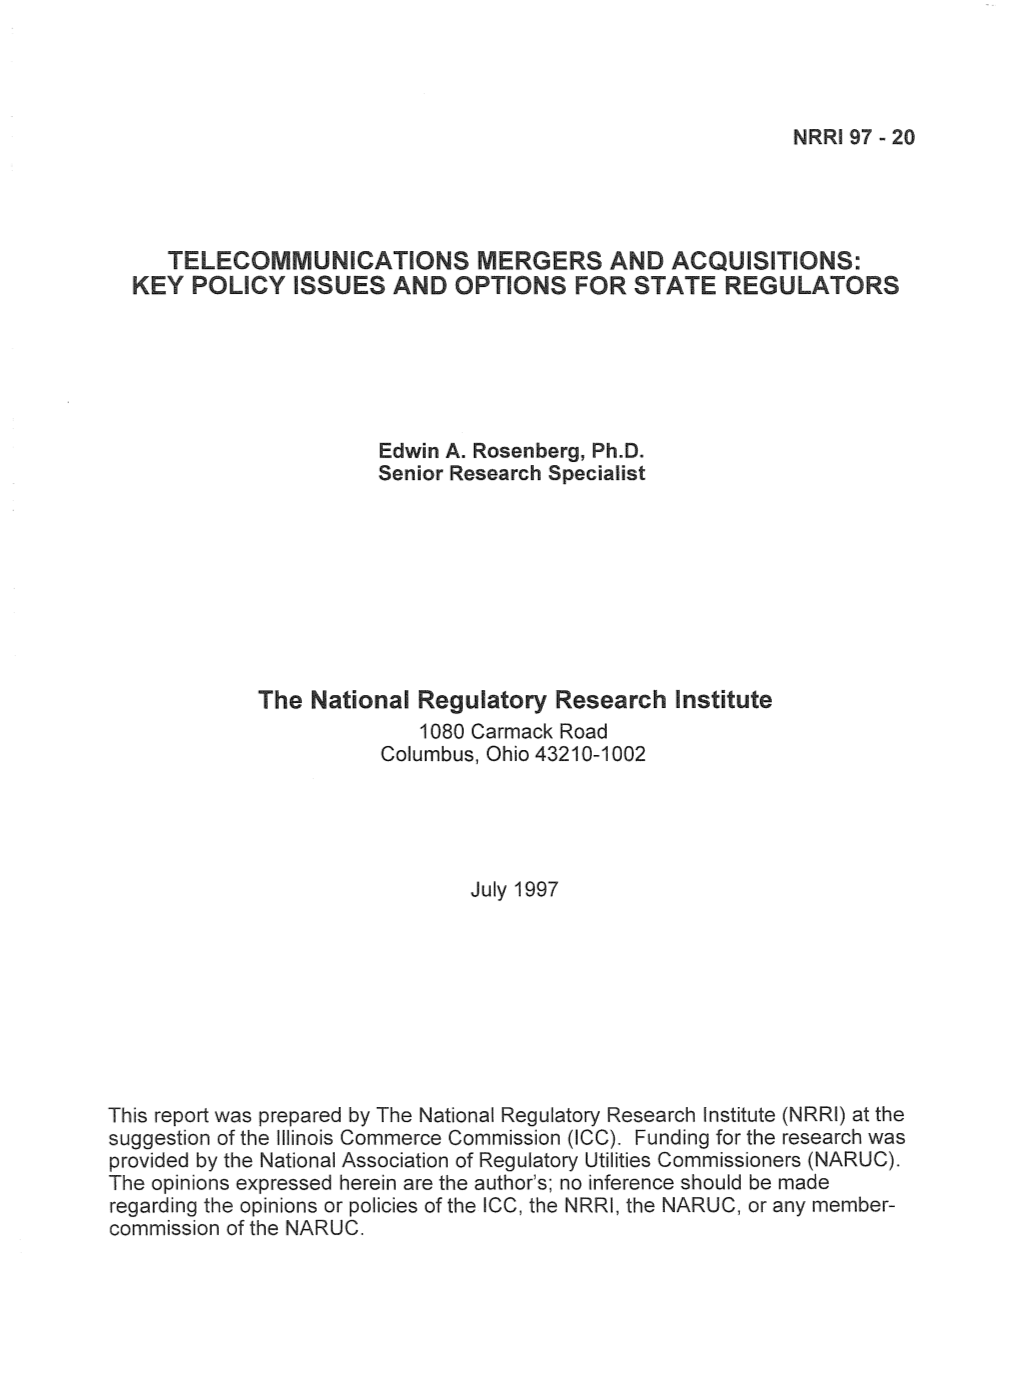 Telecommunications Mergers and Acquisitions: Key Policy Issues and Options for State Regulators